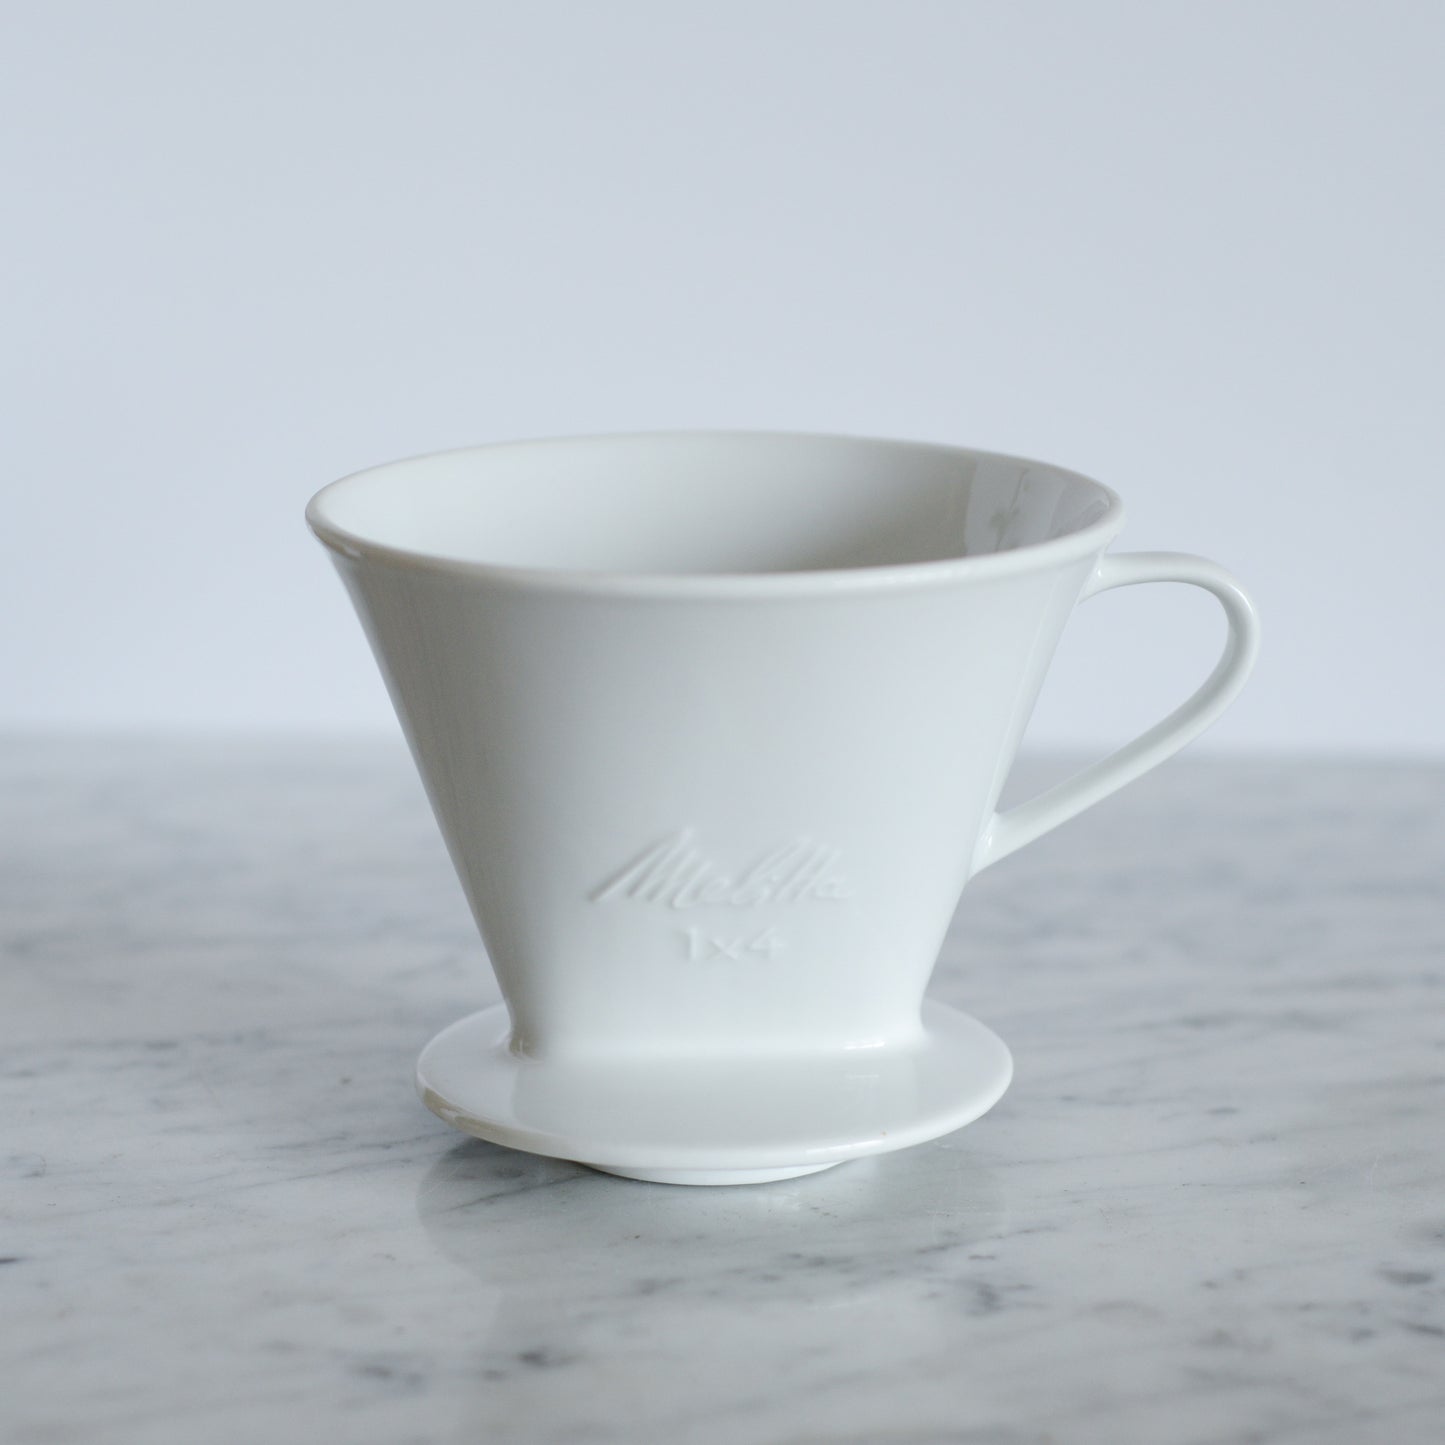 Melitta Porcelain Pour-Over Coffee Filter, 1X4